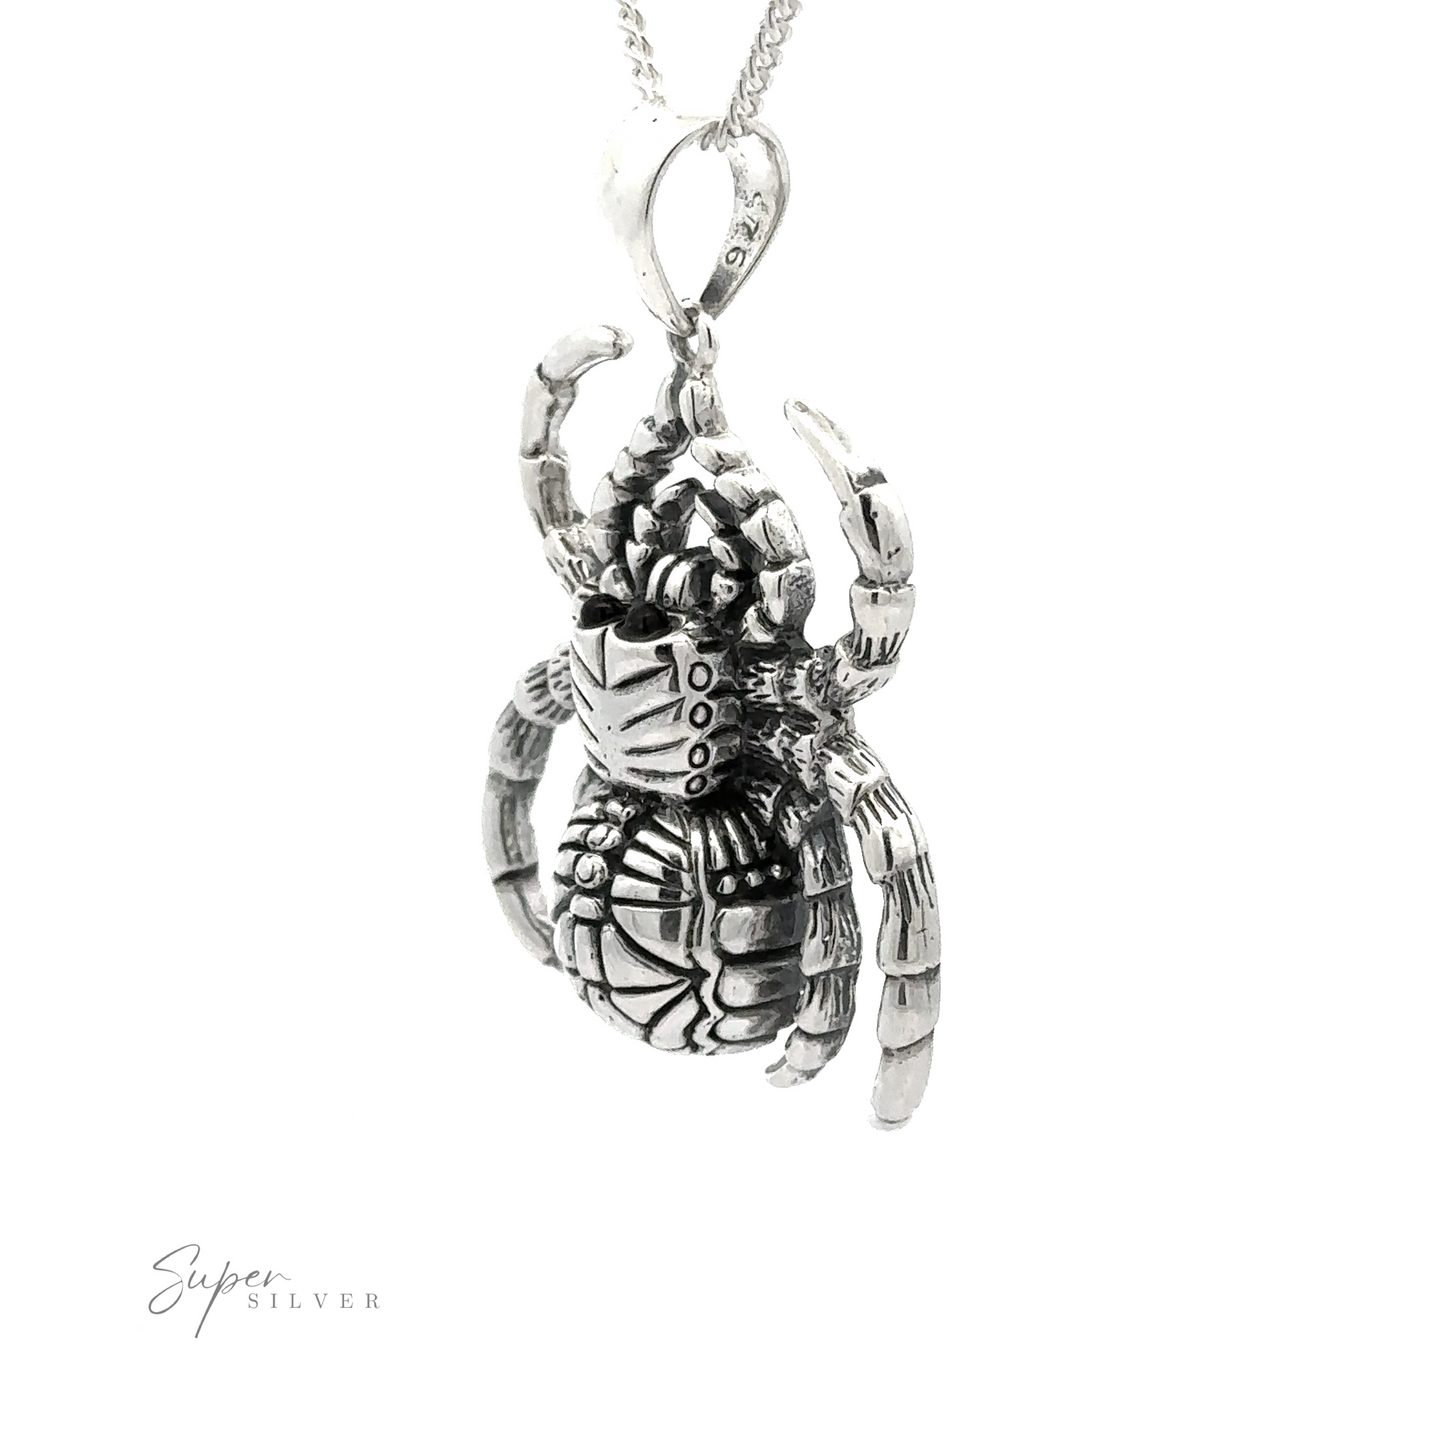 
                  
                    A silver Large Spider Pendant designed with intricate details hangs from a chain against a white background, labeled "Super Silver." Handcrafted jewelry enthusiasts will appreciate that this exquisite piece is made from .925 Sterling Silver.
                  
                